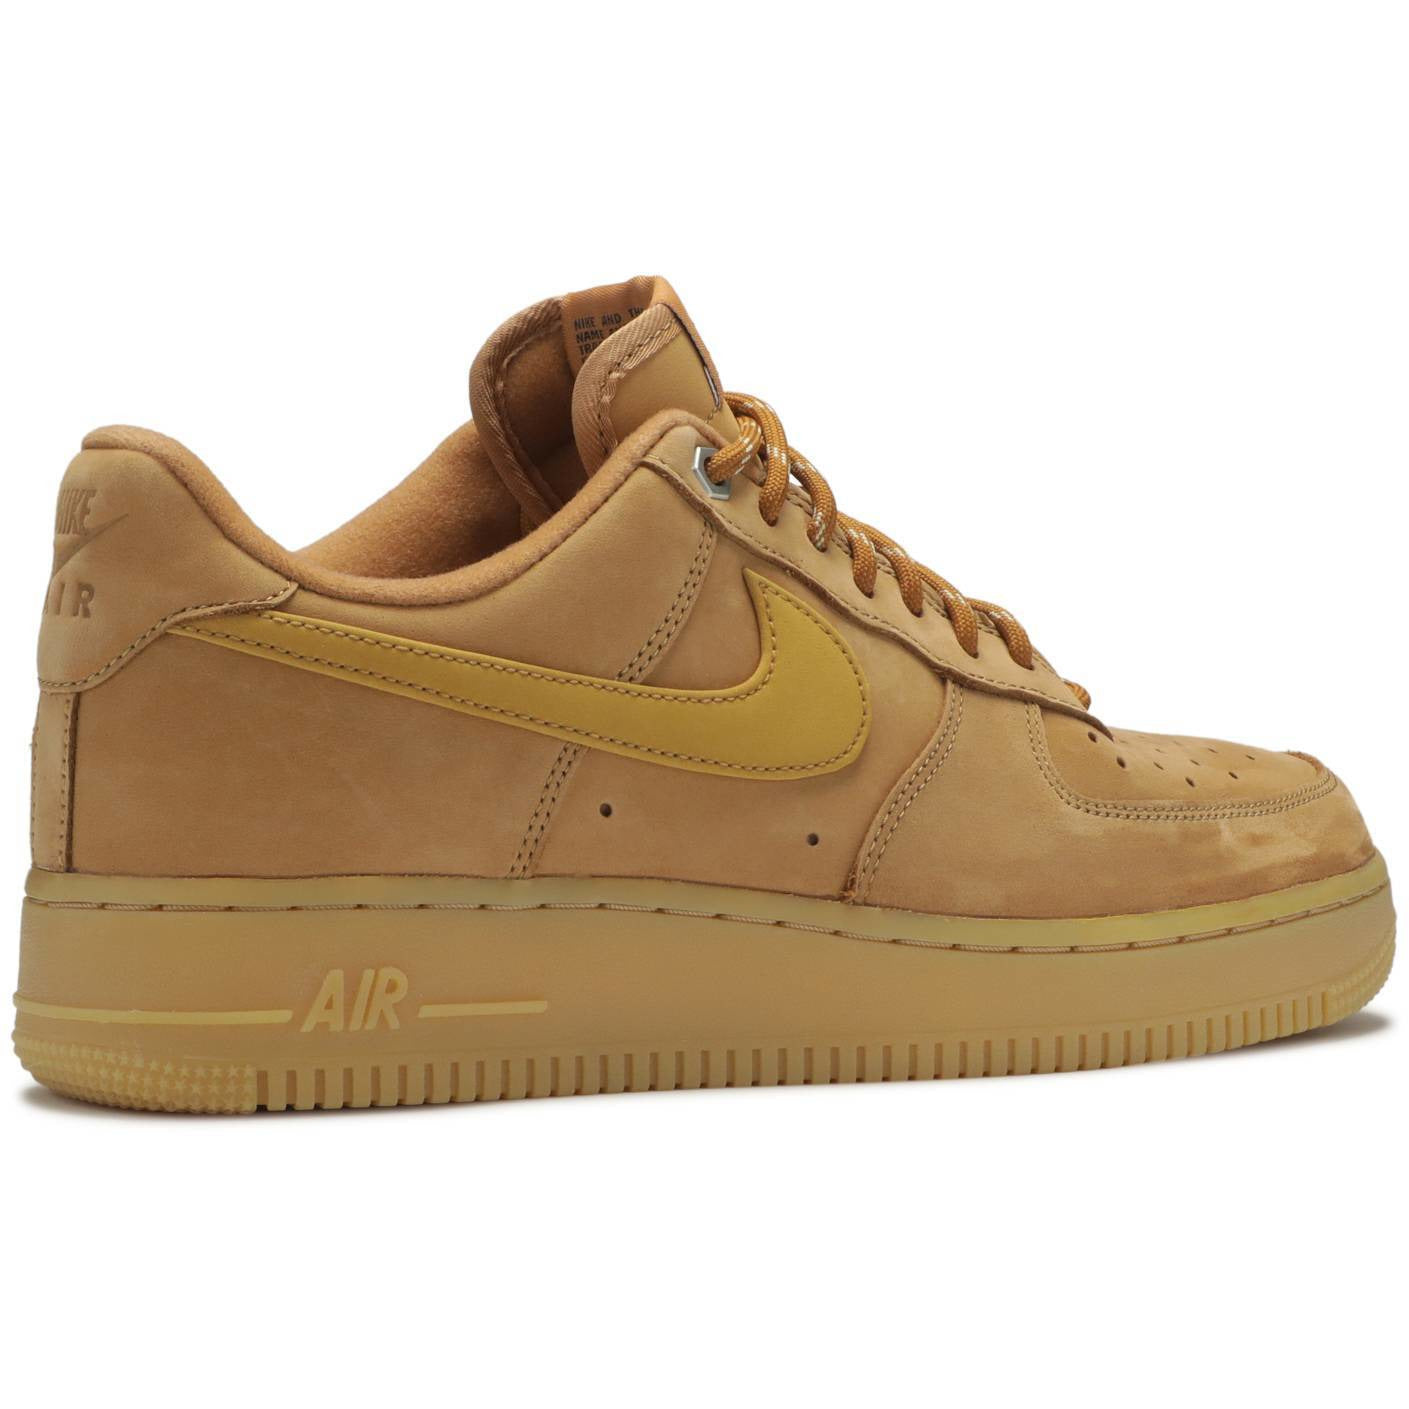 Air Force 1 07 Flax Gum Light Brown - Manore Store